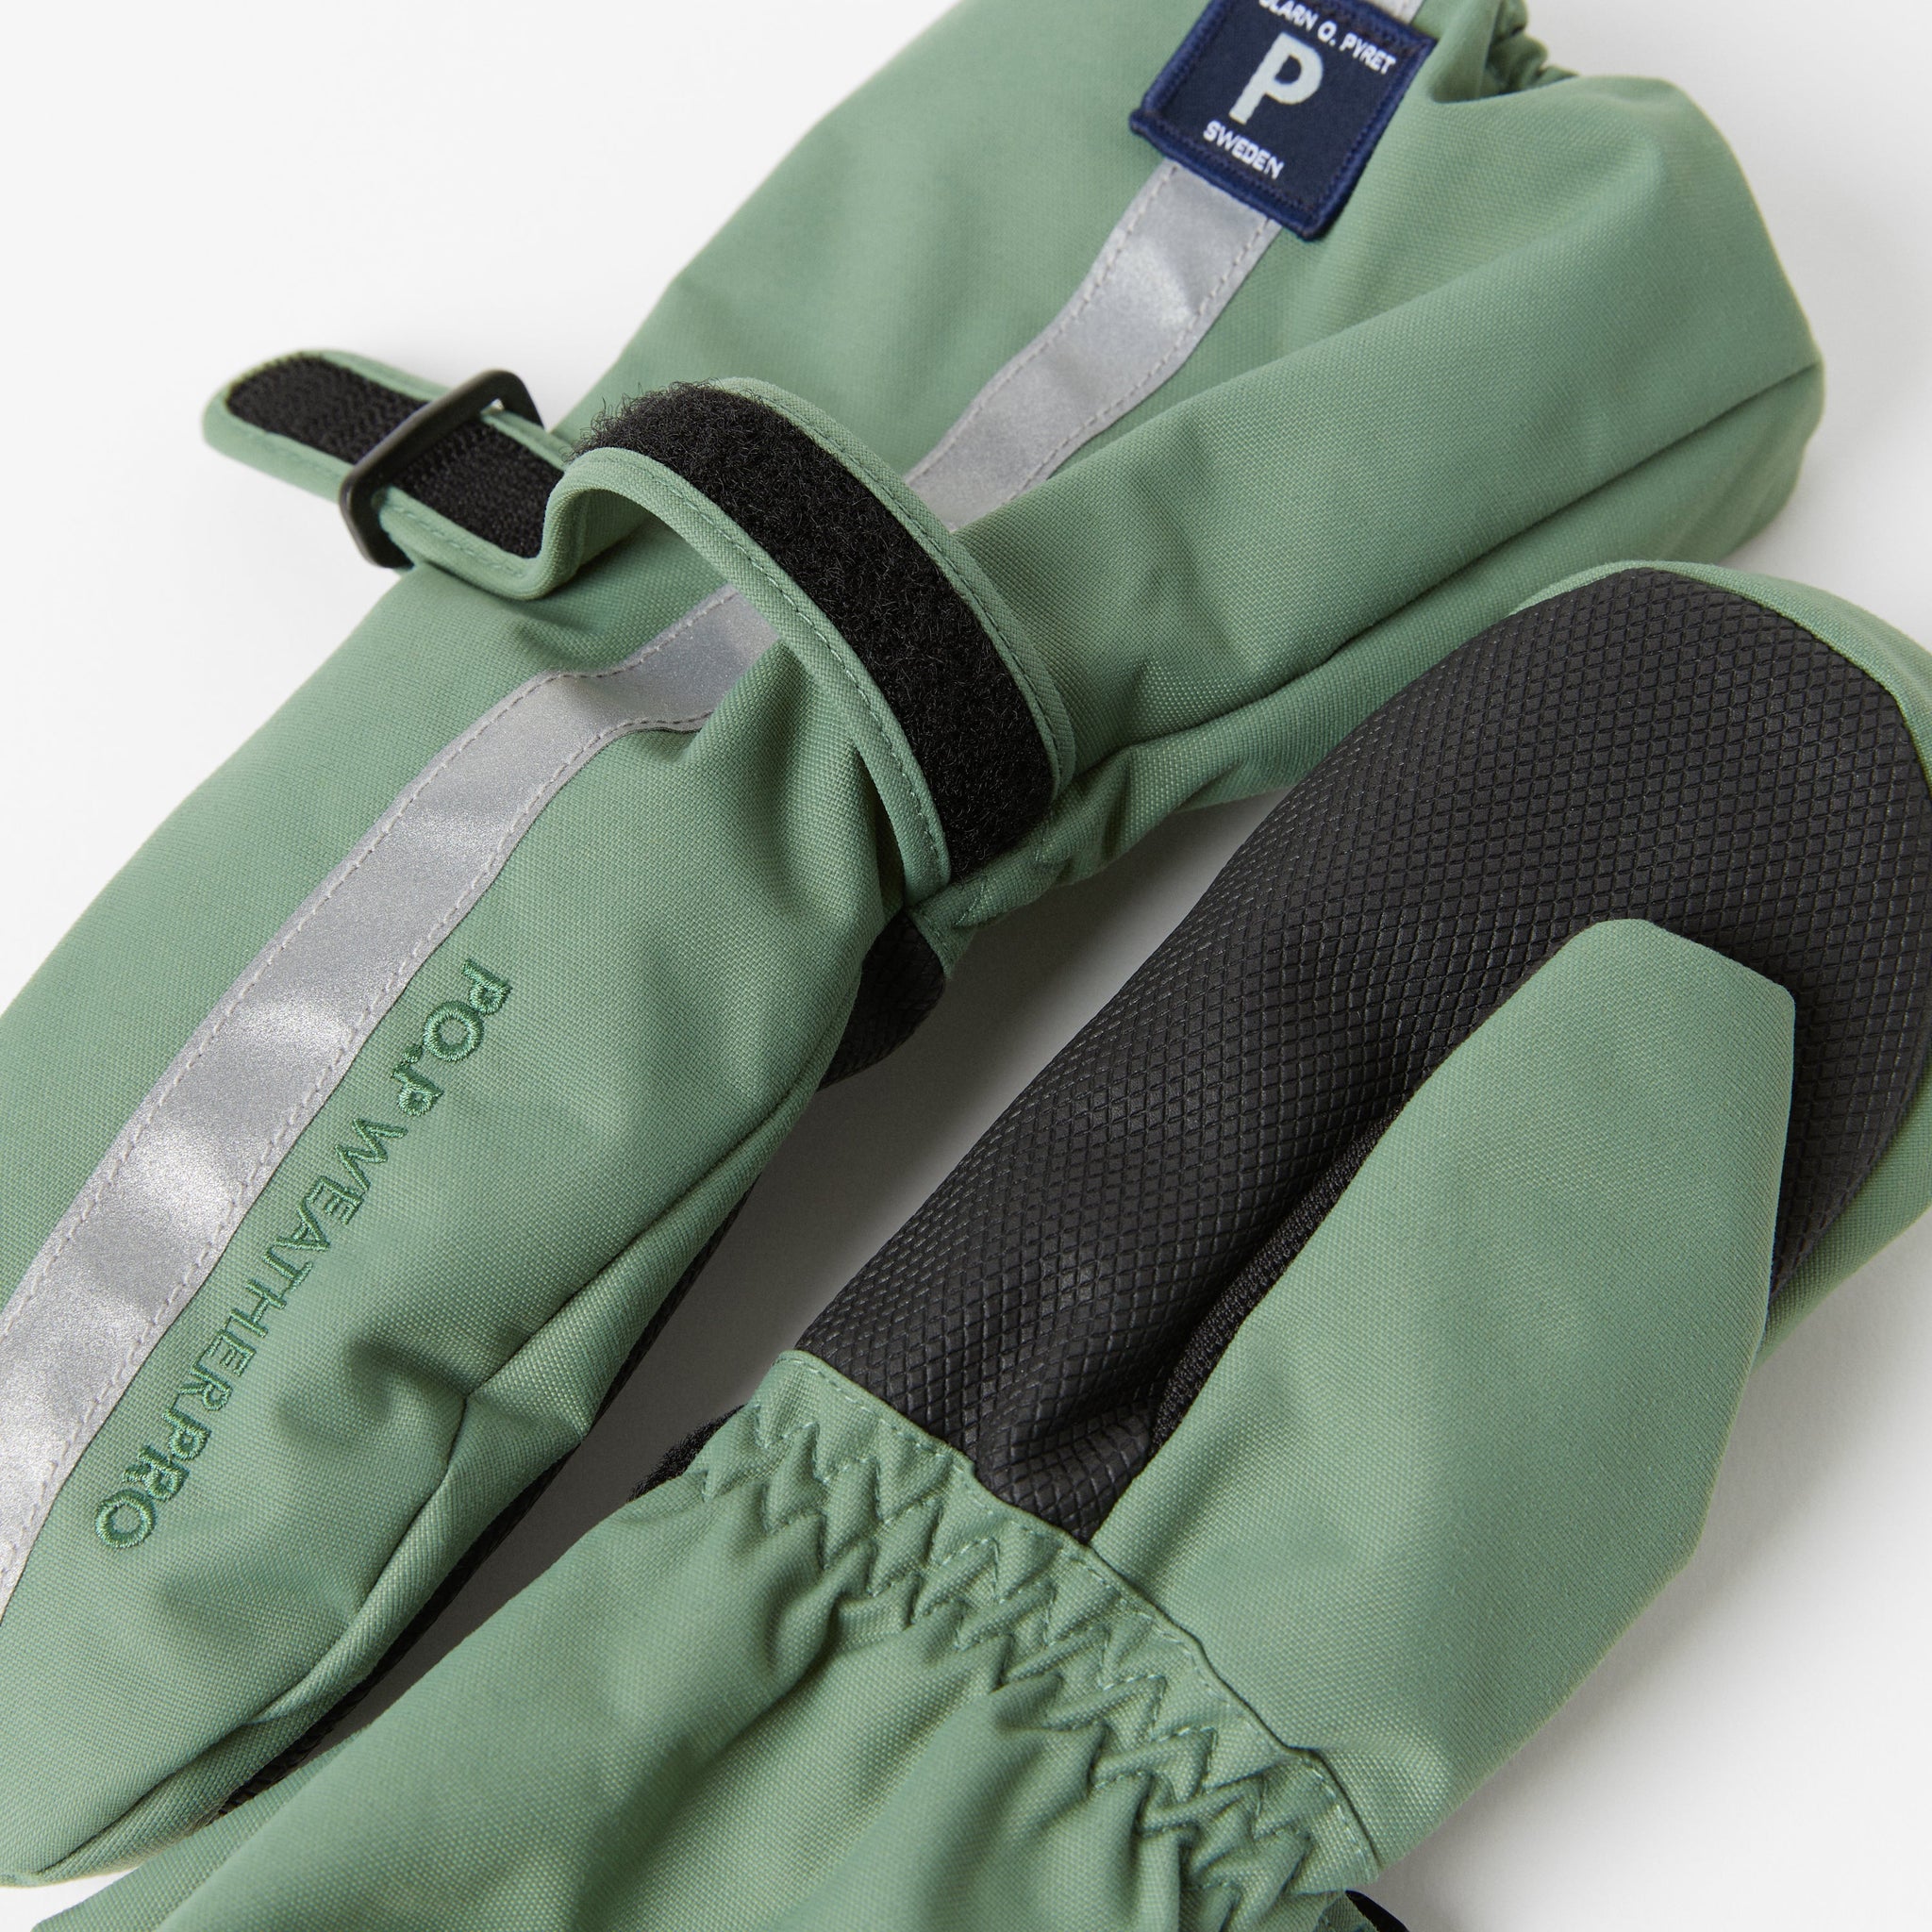 Green Padded Kids Waterproof Mittens from the Polarn O. Pyret kidswear collection. Ethically produced outerwear.